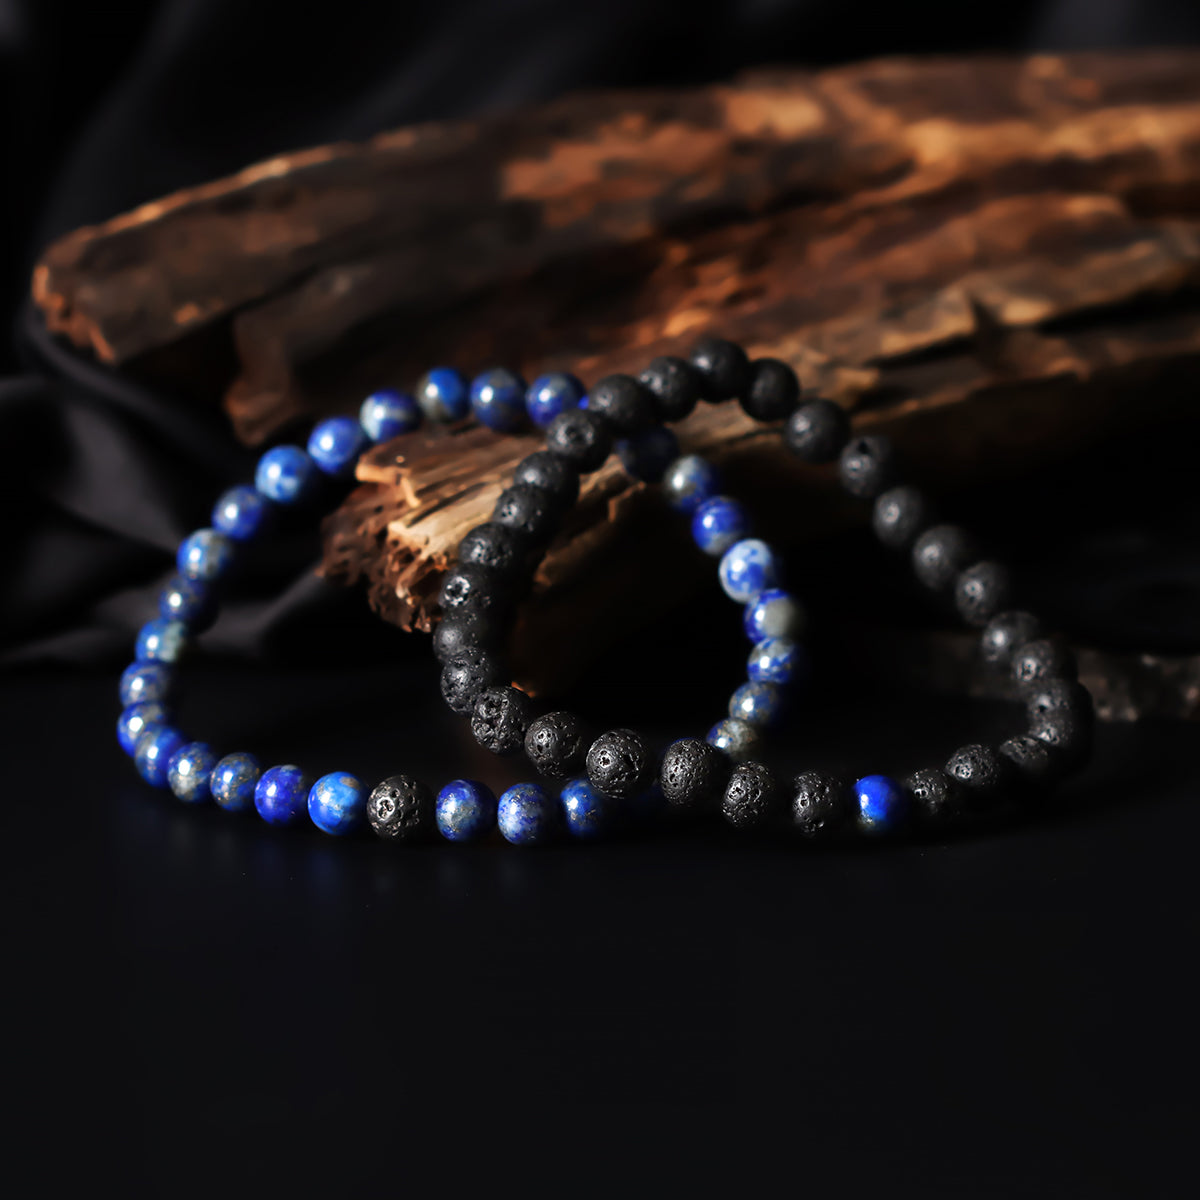 Artistic close-up of the Natural Lapis Lazuli & Lava Gemstone Bracelet. A captivating shot capturing the deep blue hues of Lapis Lazuli and the raw elegance of lava gemstones, creating a unique and eye-catching composition